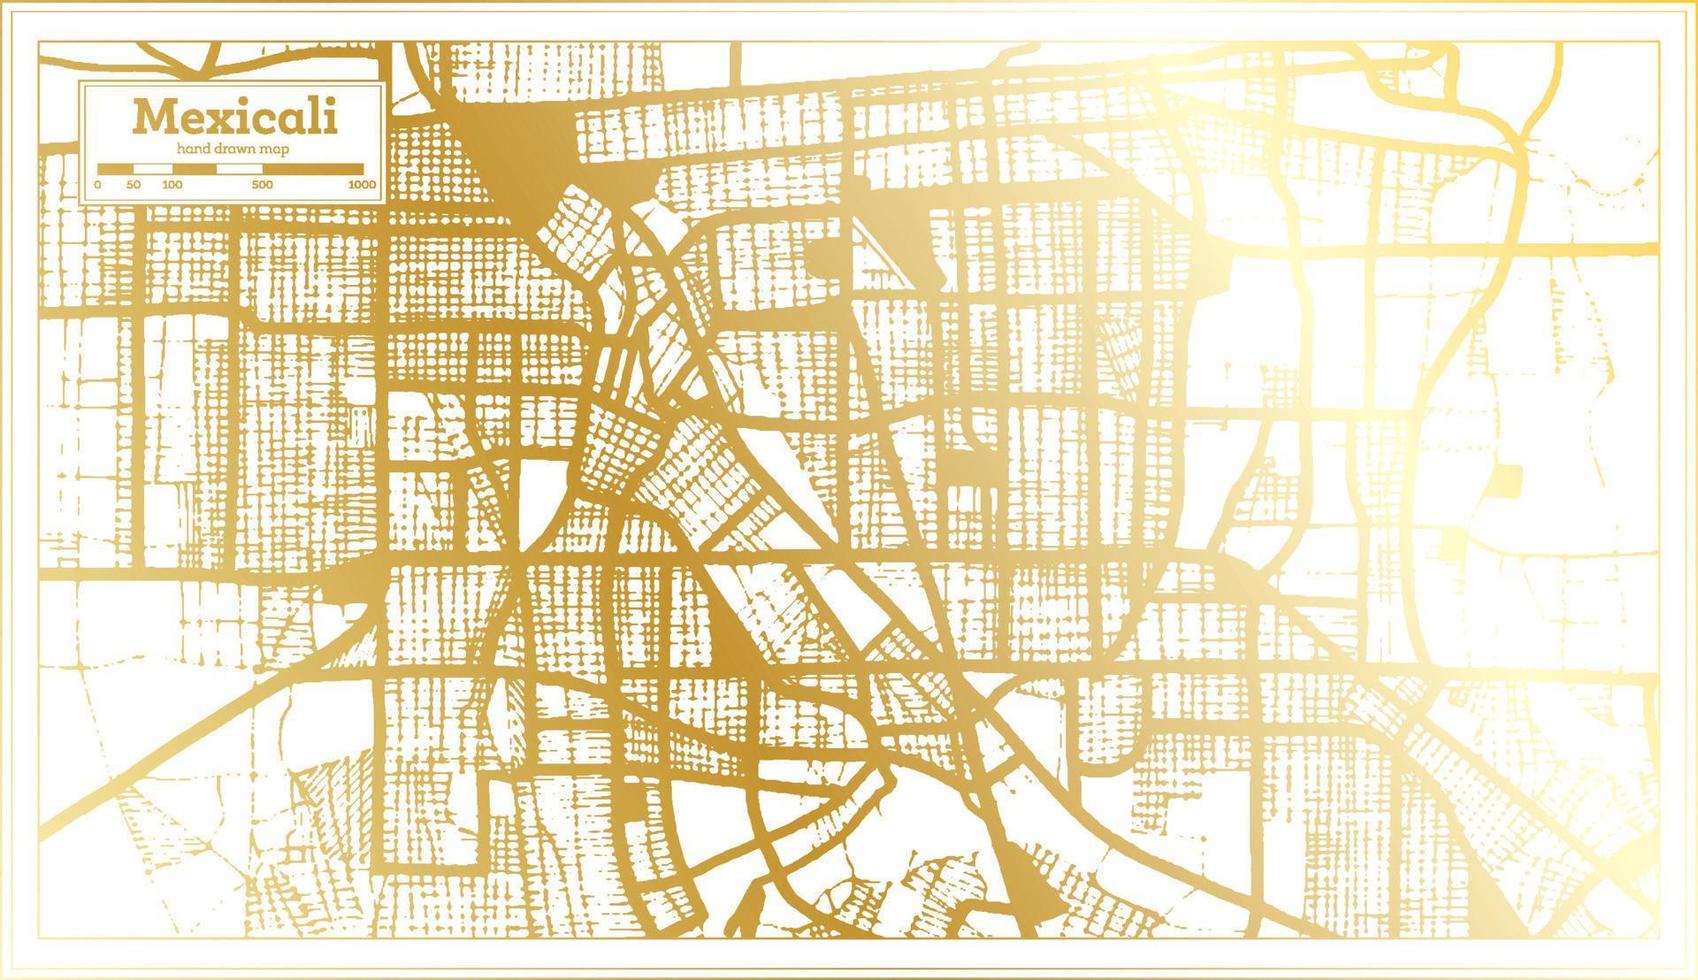 Mexicali Mexico City Map in Retro Style in Golden Color. Outline Map. vector